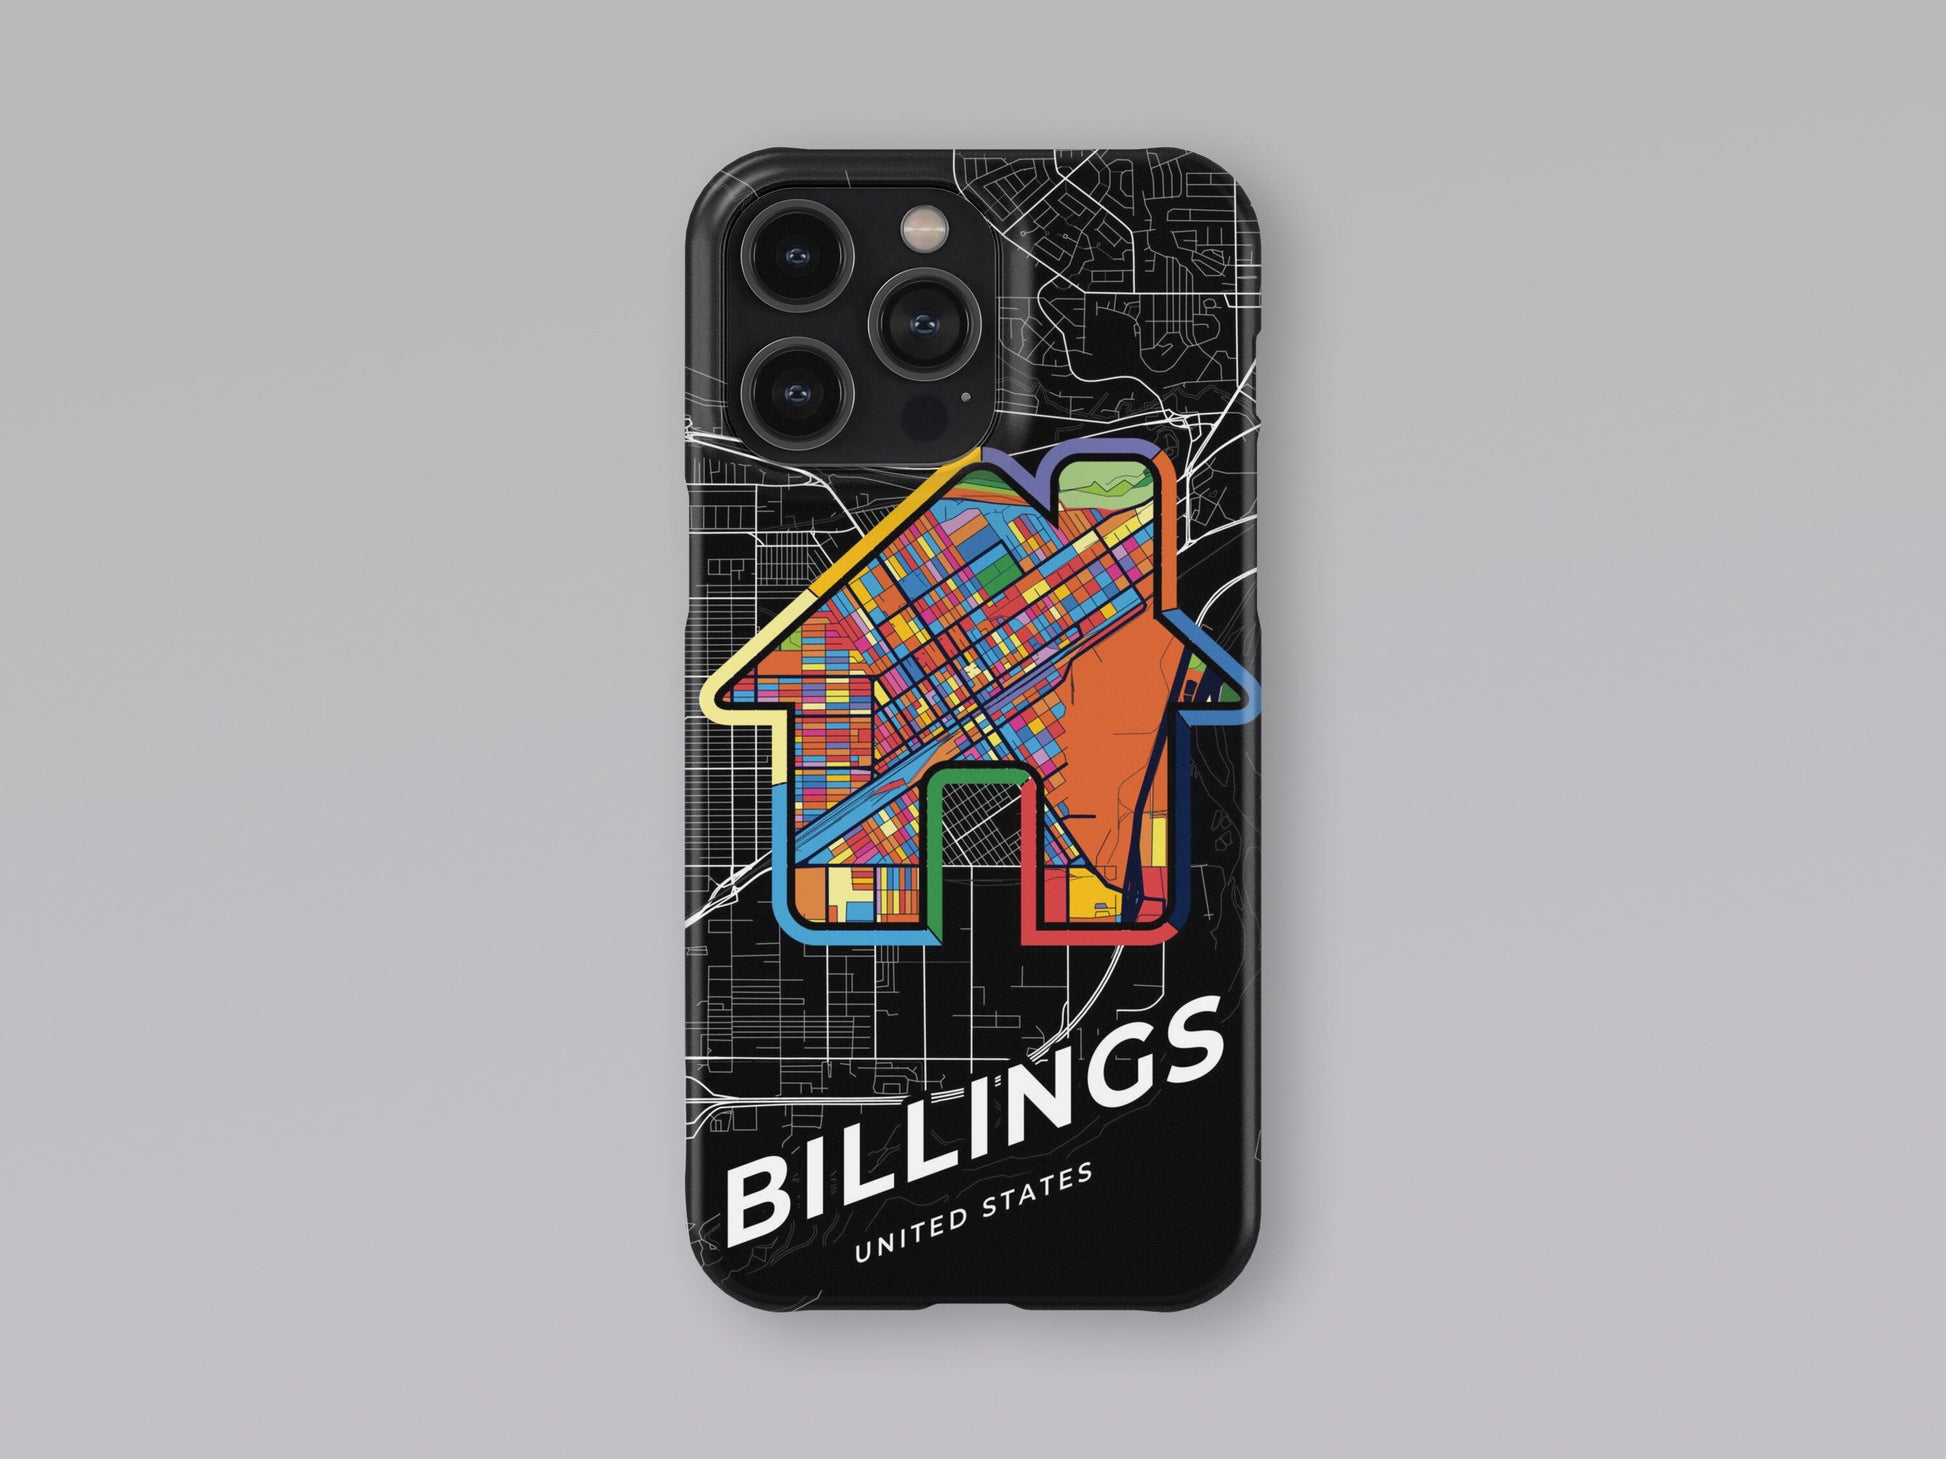 Billings Montana slim phone case with colorful icon. Birthday, wedding or housewarming gift. Couple match cases. 3